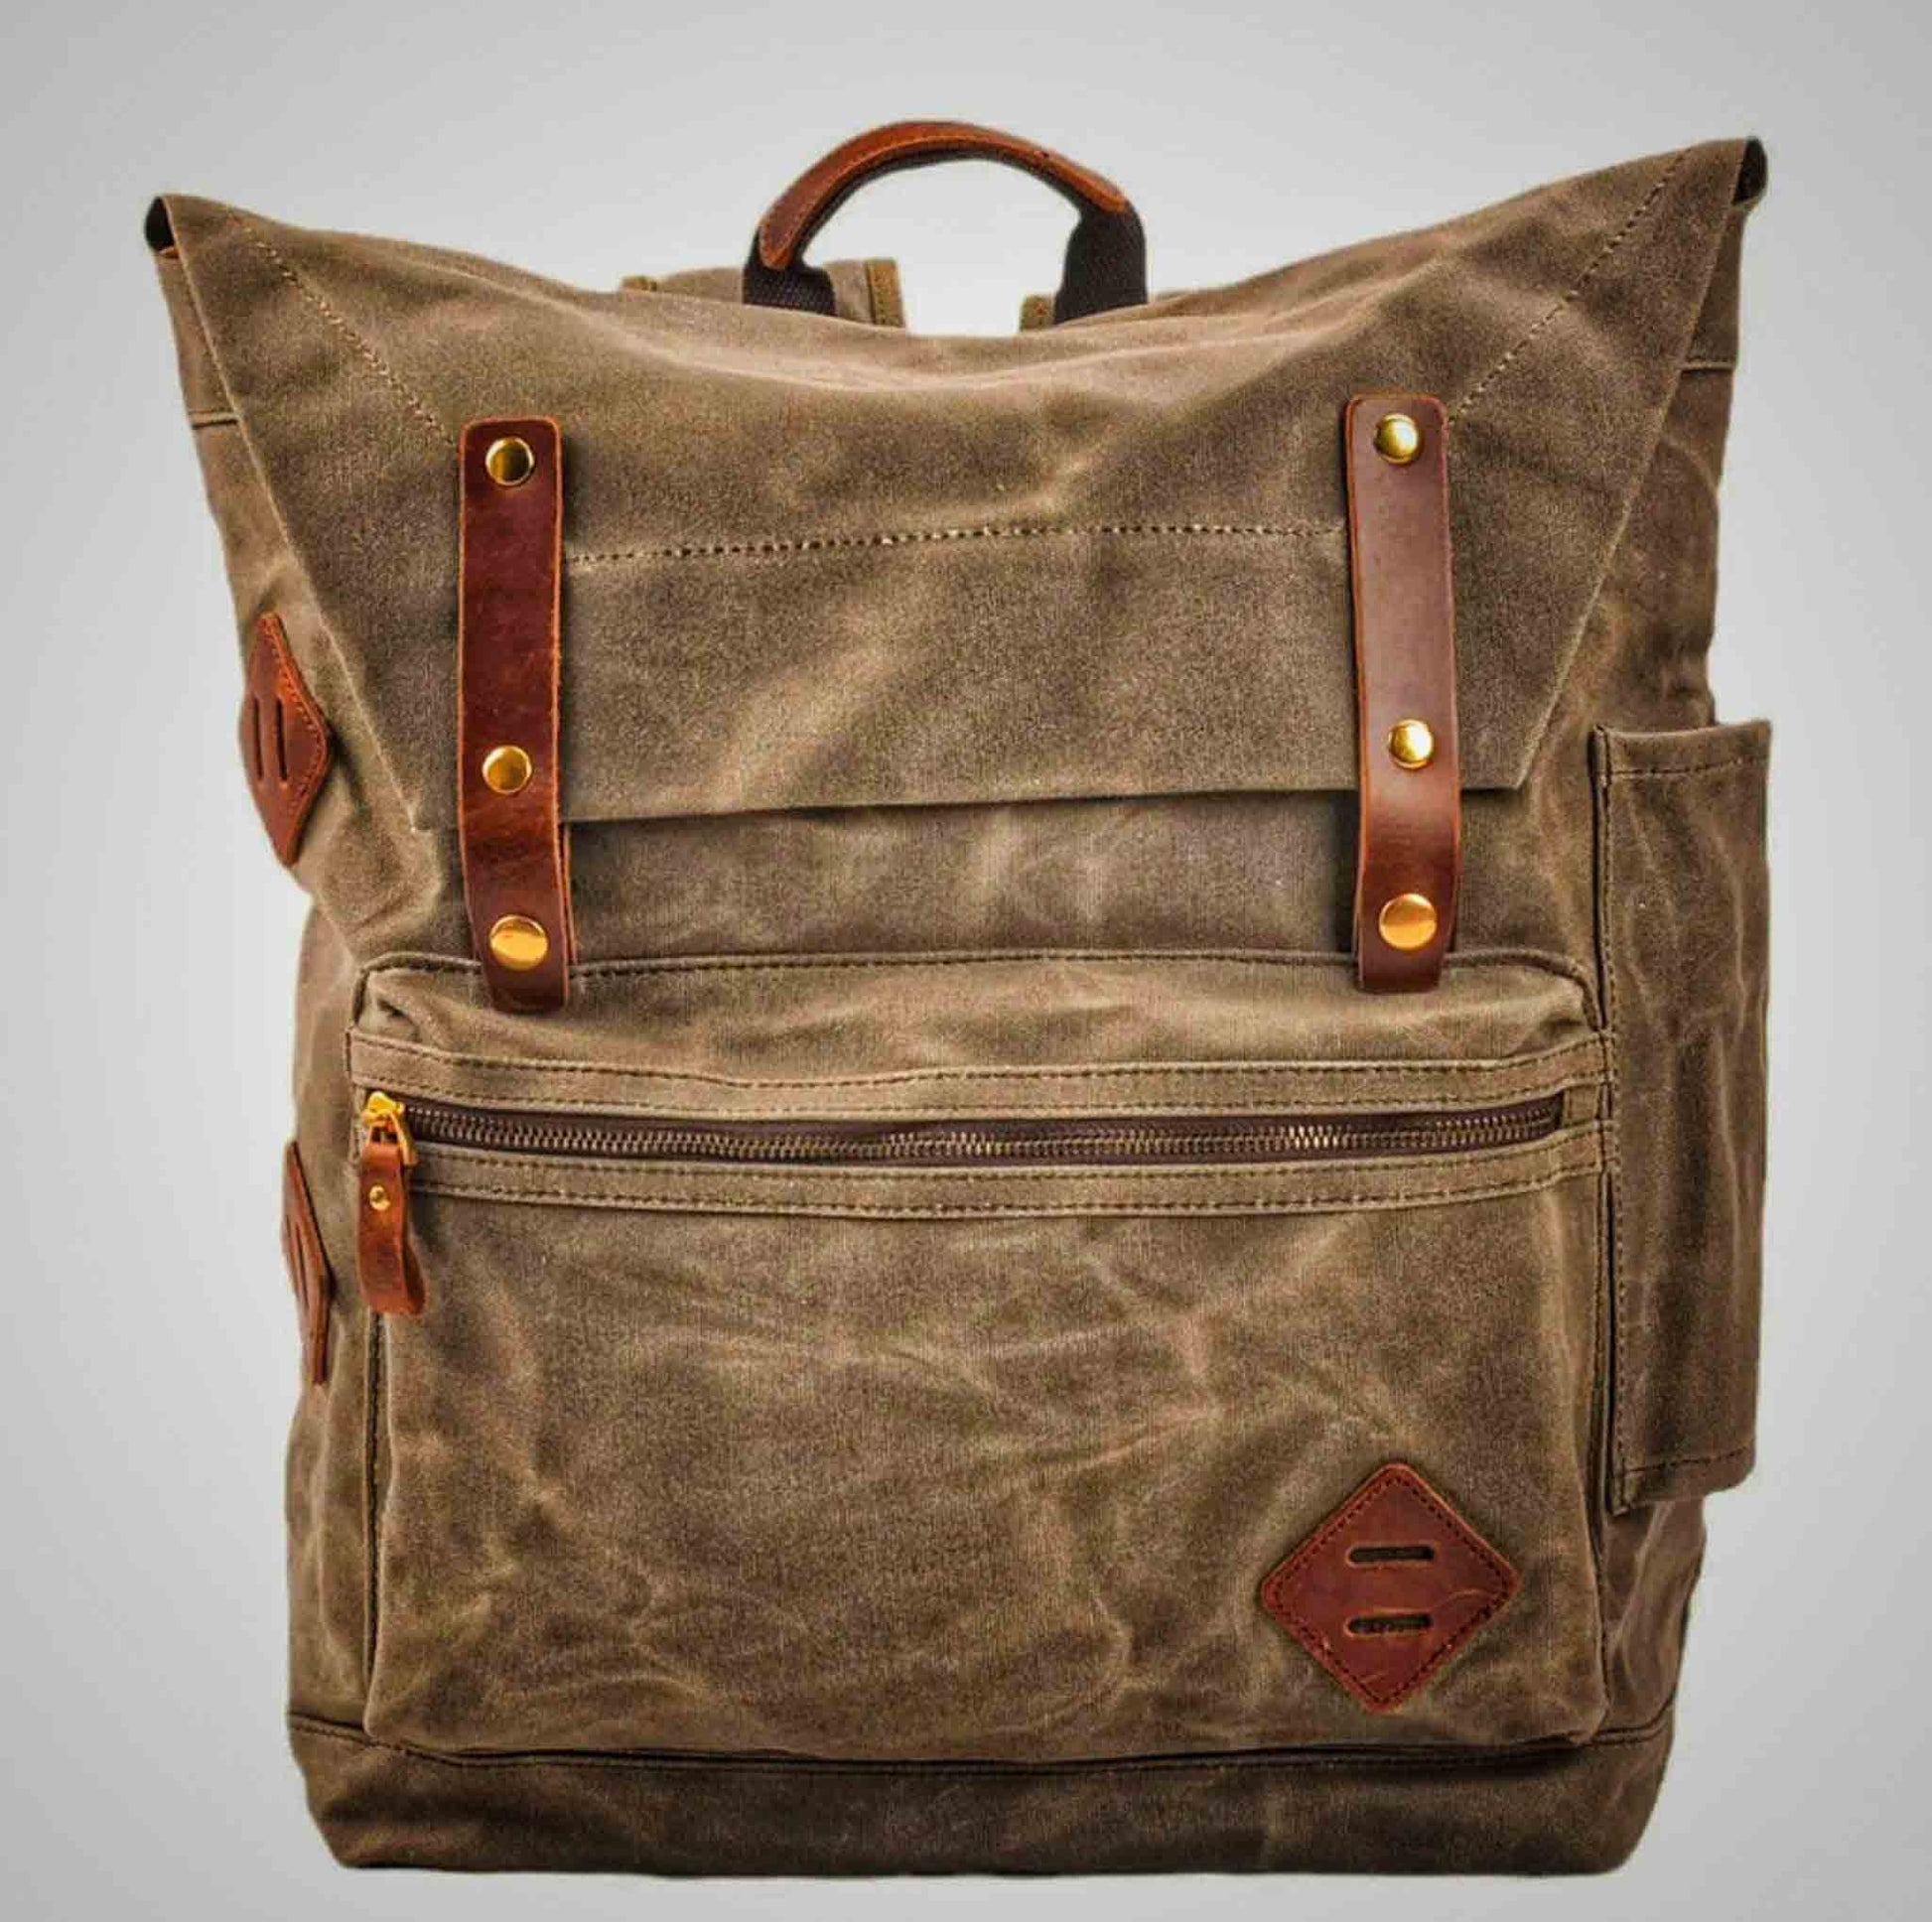 Classic Vintage Canvas Backpack for Hiking & Camping - Army Green Available at 2Fast2See.co